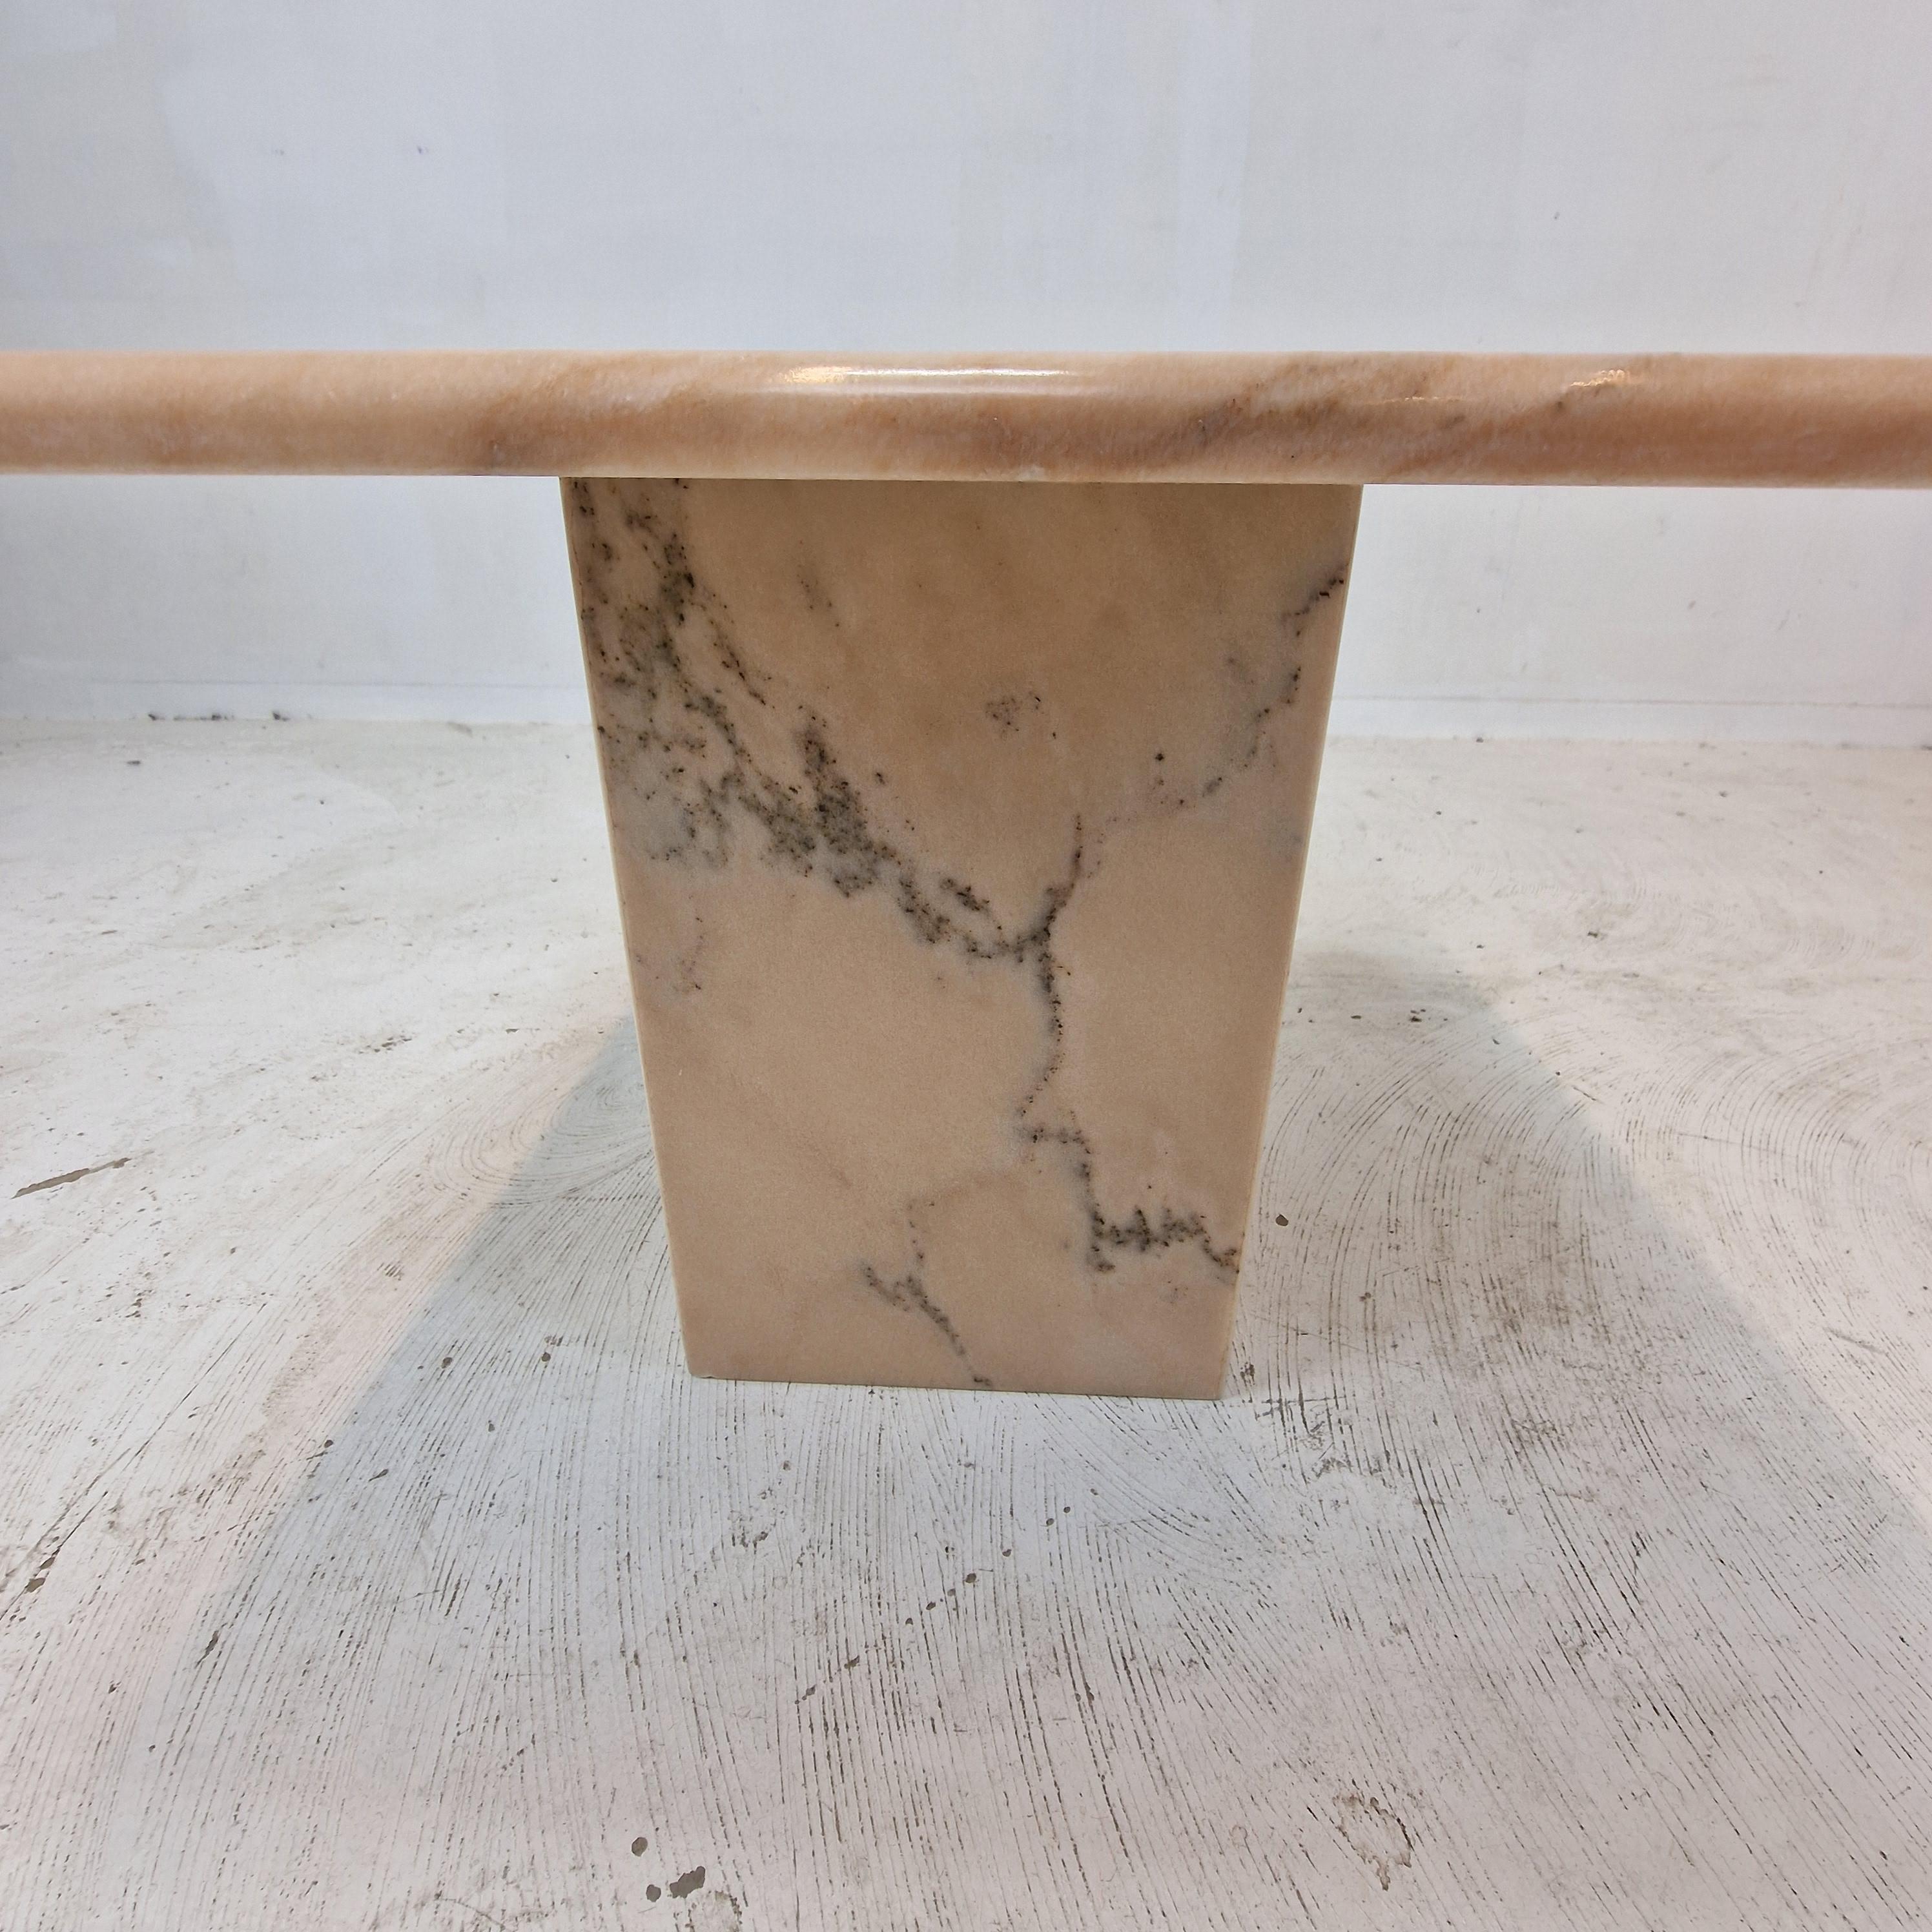 Italian Marble Coffee Table, 1980s For Sale 5